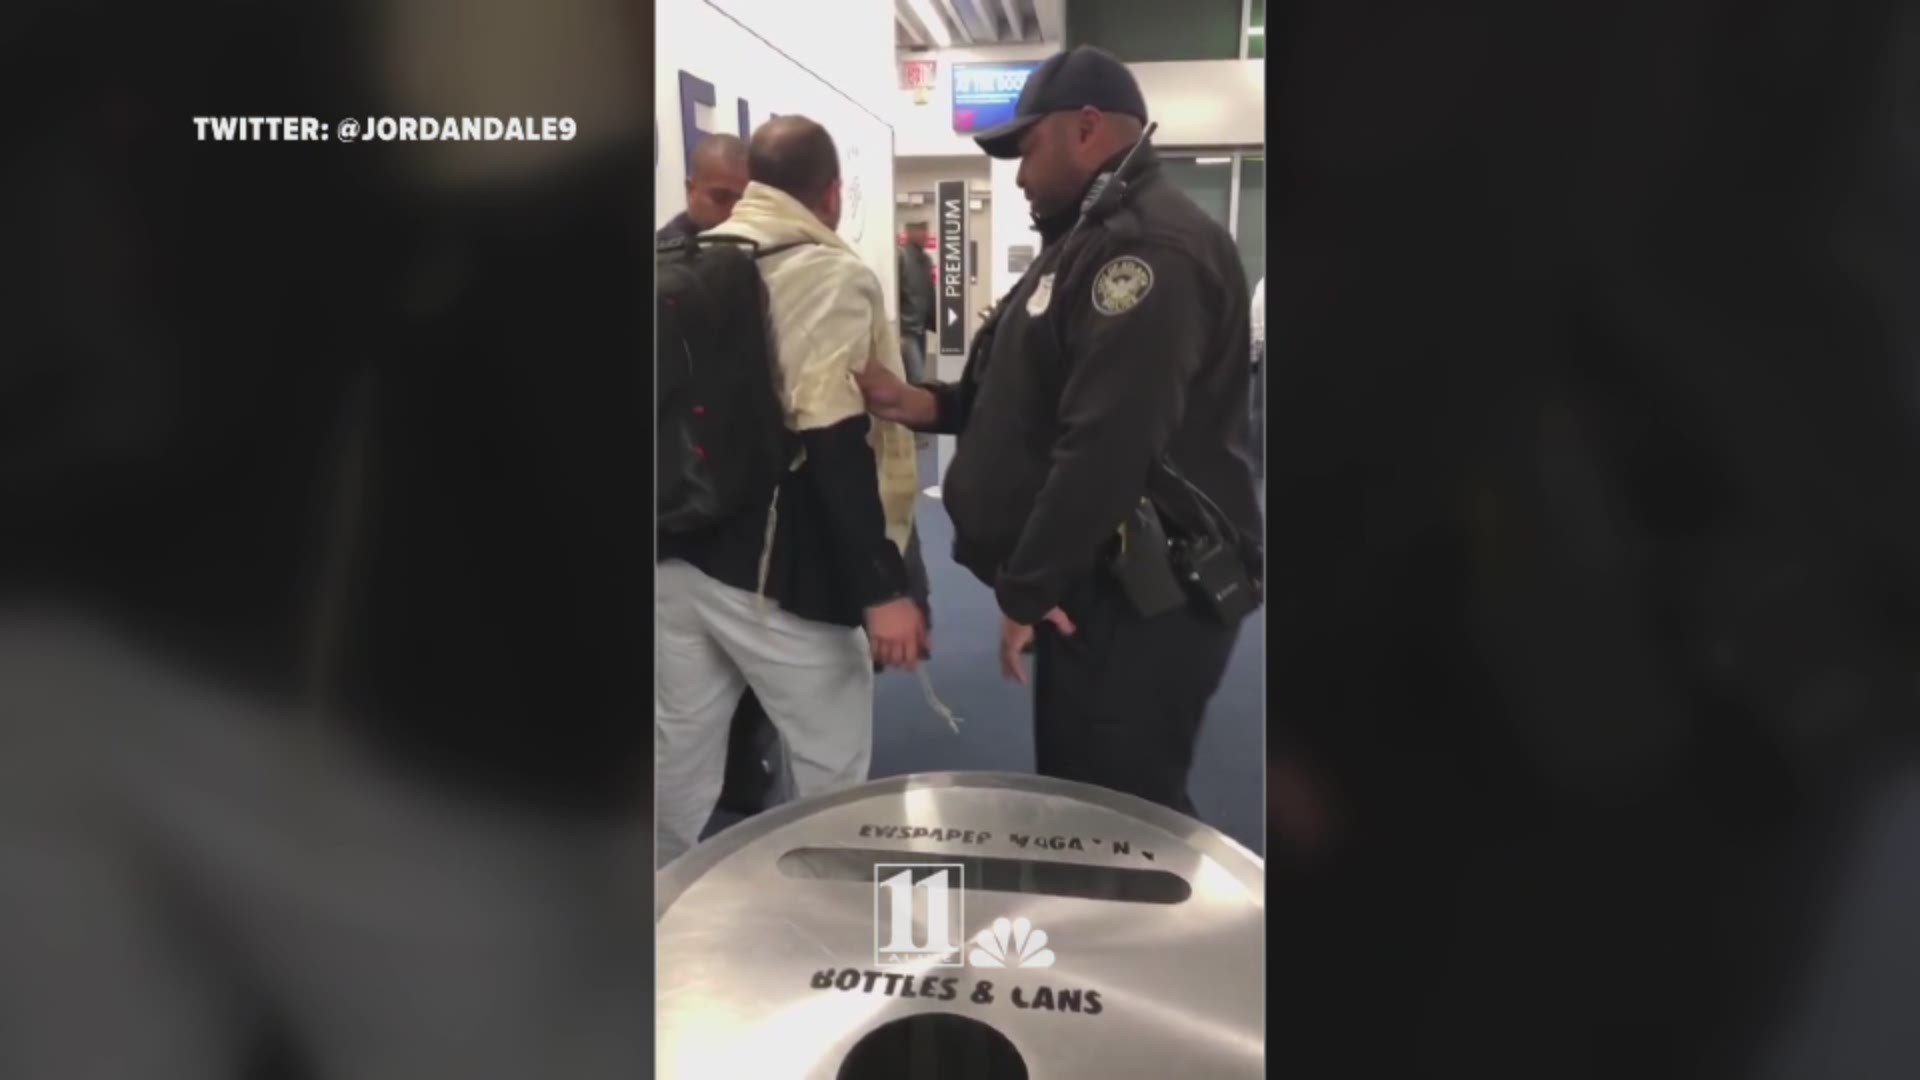 A person near the gate recorded the struggle with police as officers tried to arrest the man after the D.C. to Atlanta flight.